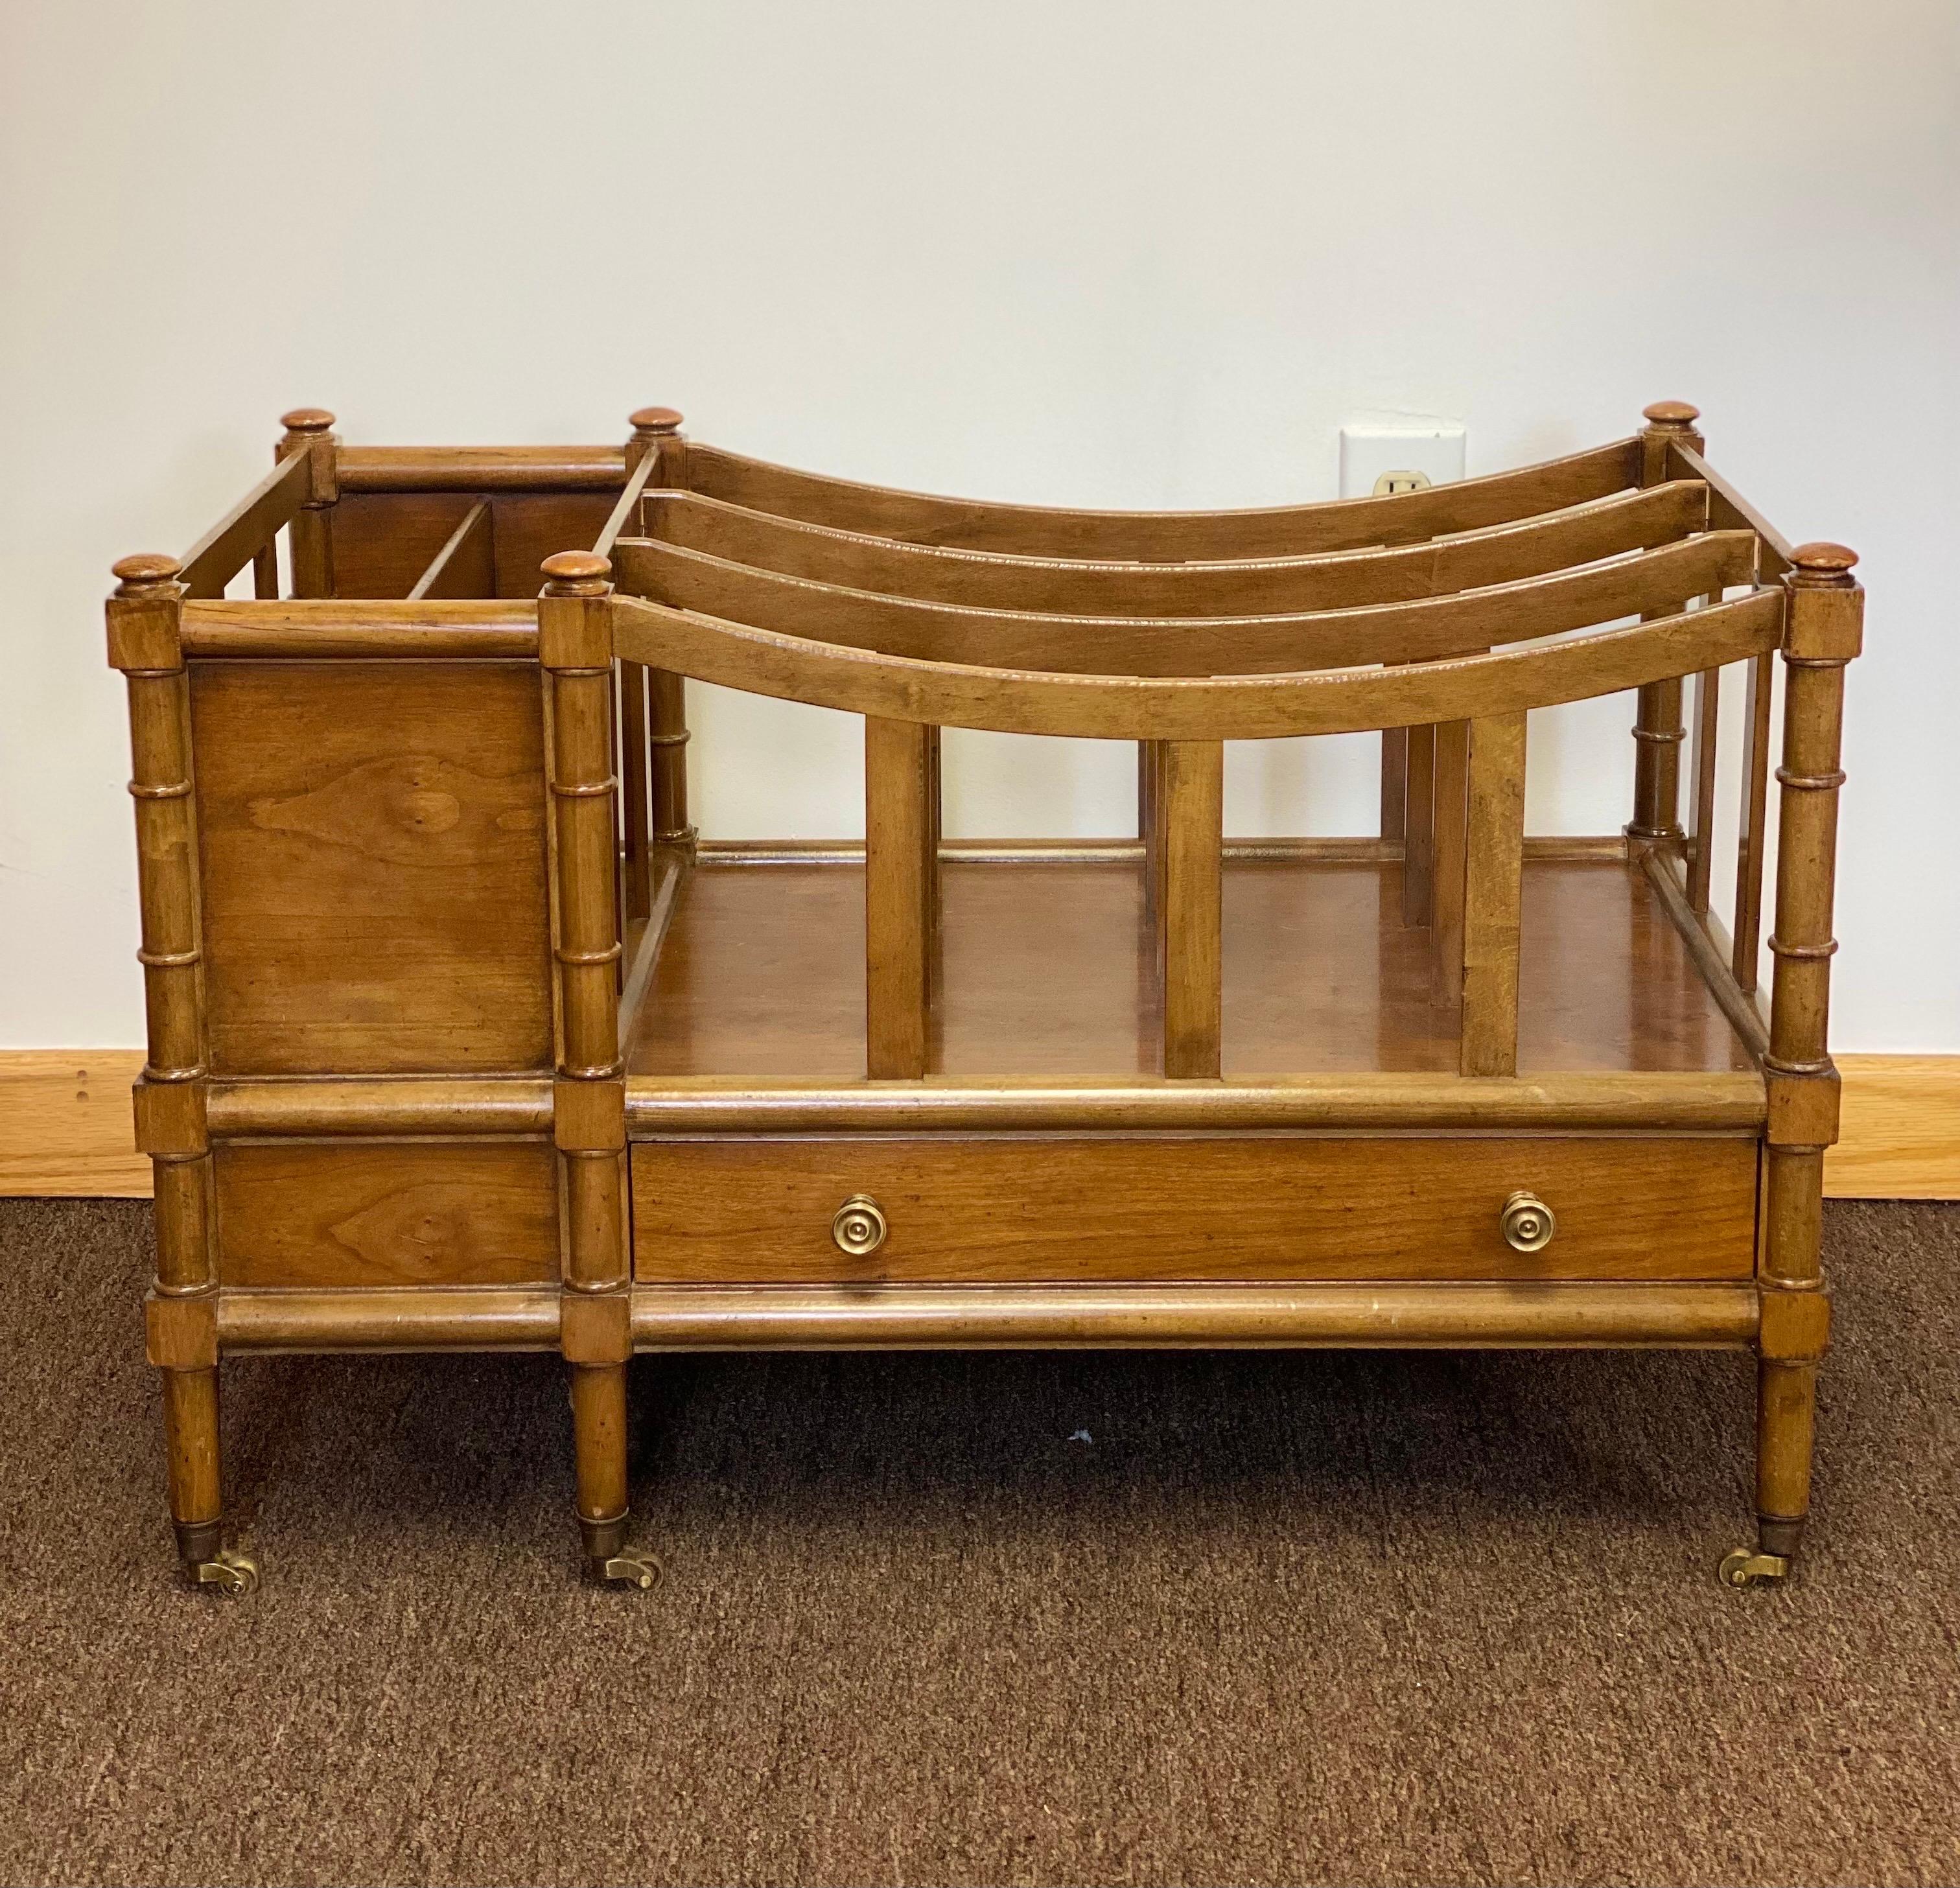 We are very pleased to offer a beautiful music caddy or magazine rack by Baker Furniture Company, circa the 1960s. Finely handcrafted from solid hardwood oak or cherry, this American made piece features magnificent artistry and a beautiful finish.